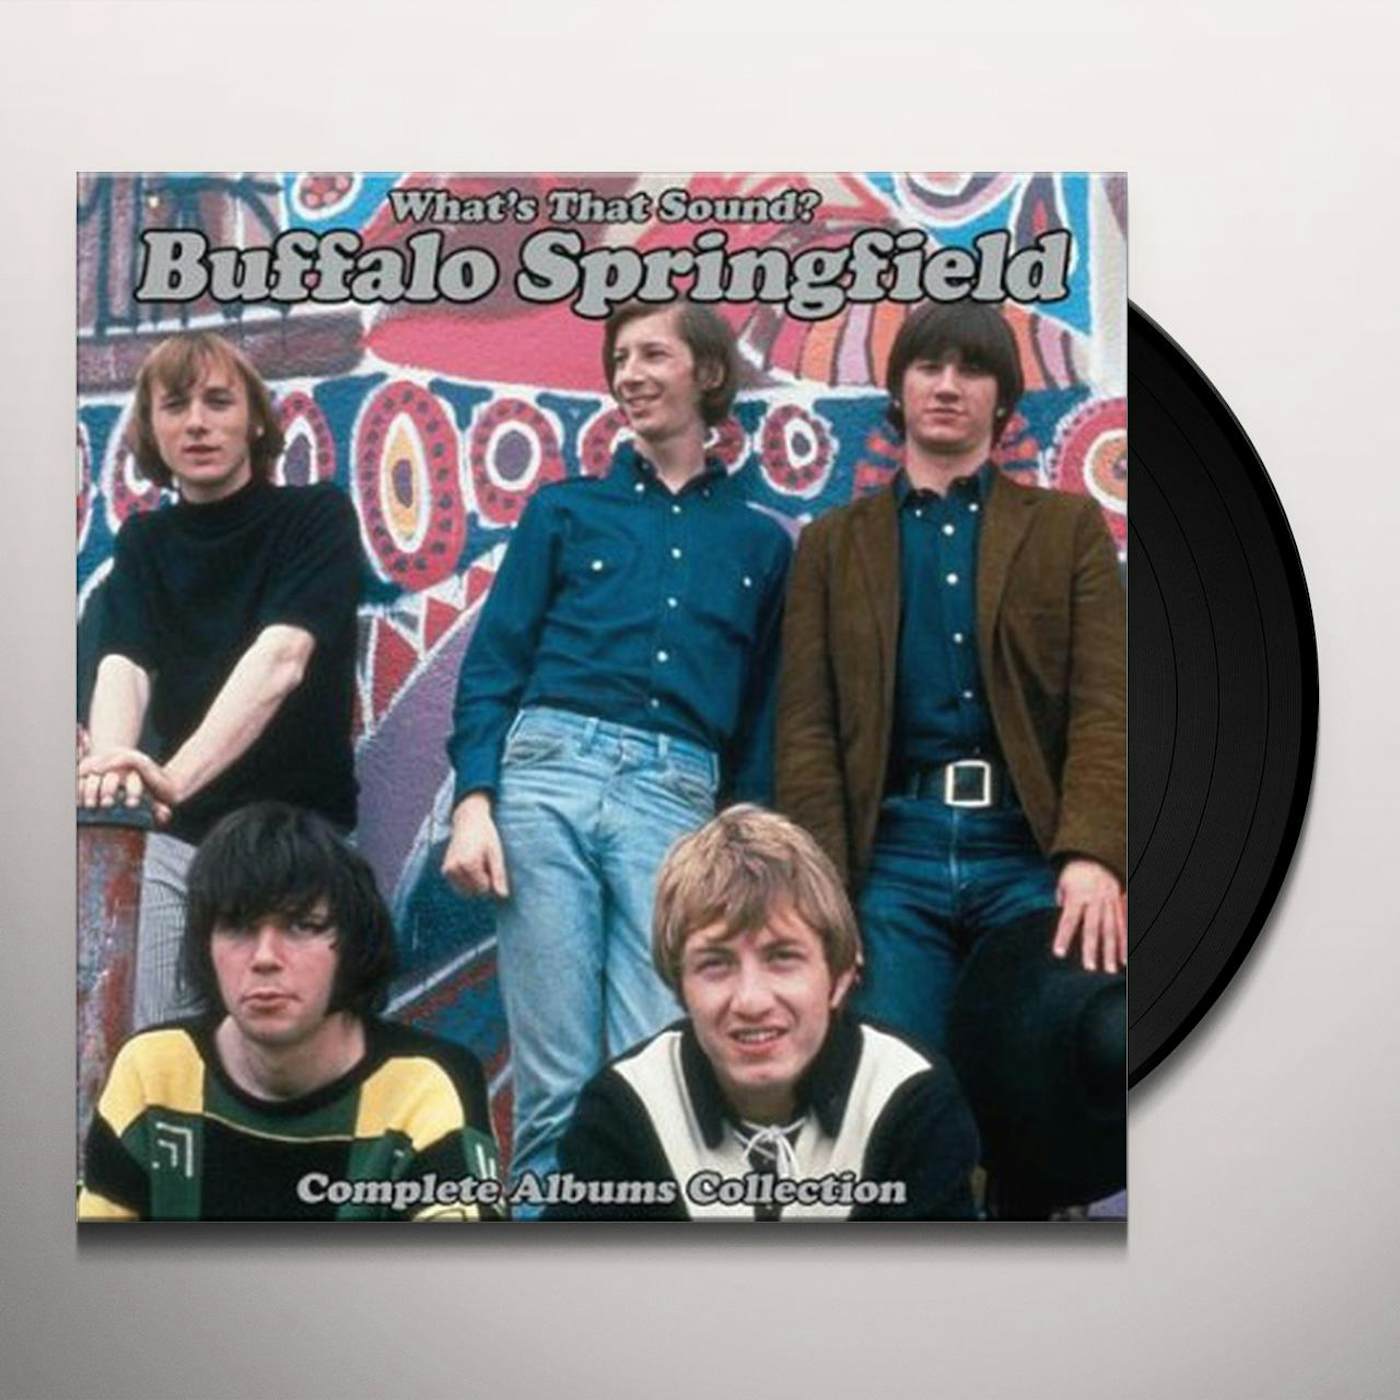 Buffalo Springfield WHAT'S THAT SOUND - COMPLETE ALBUMS COLLECTION Vinyl Record